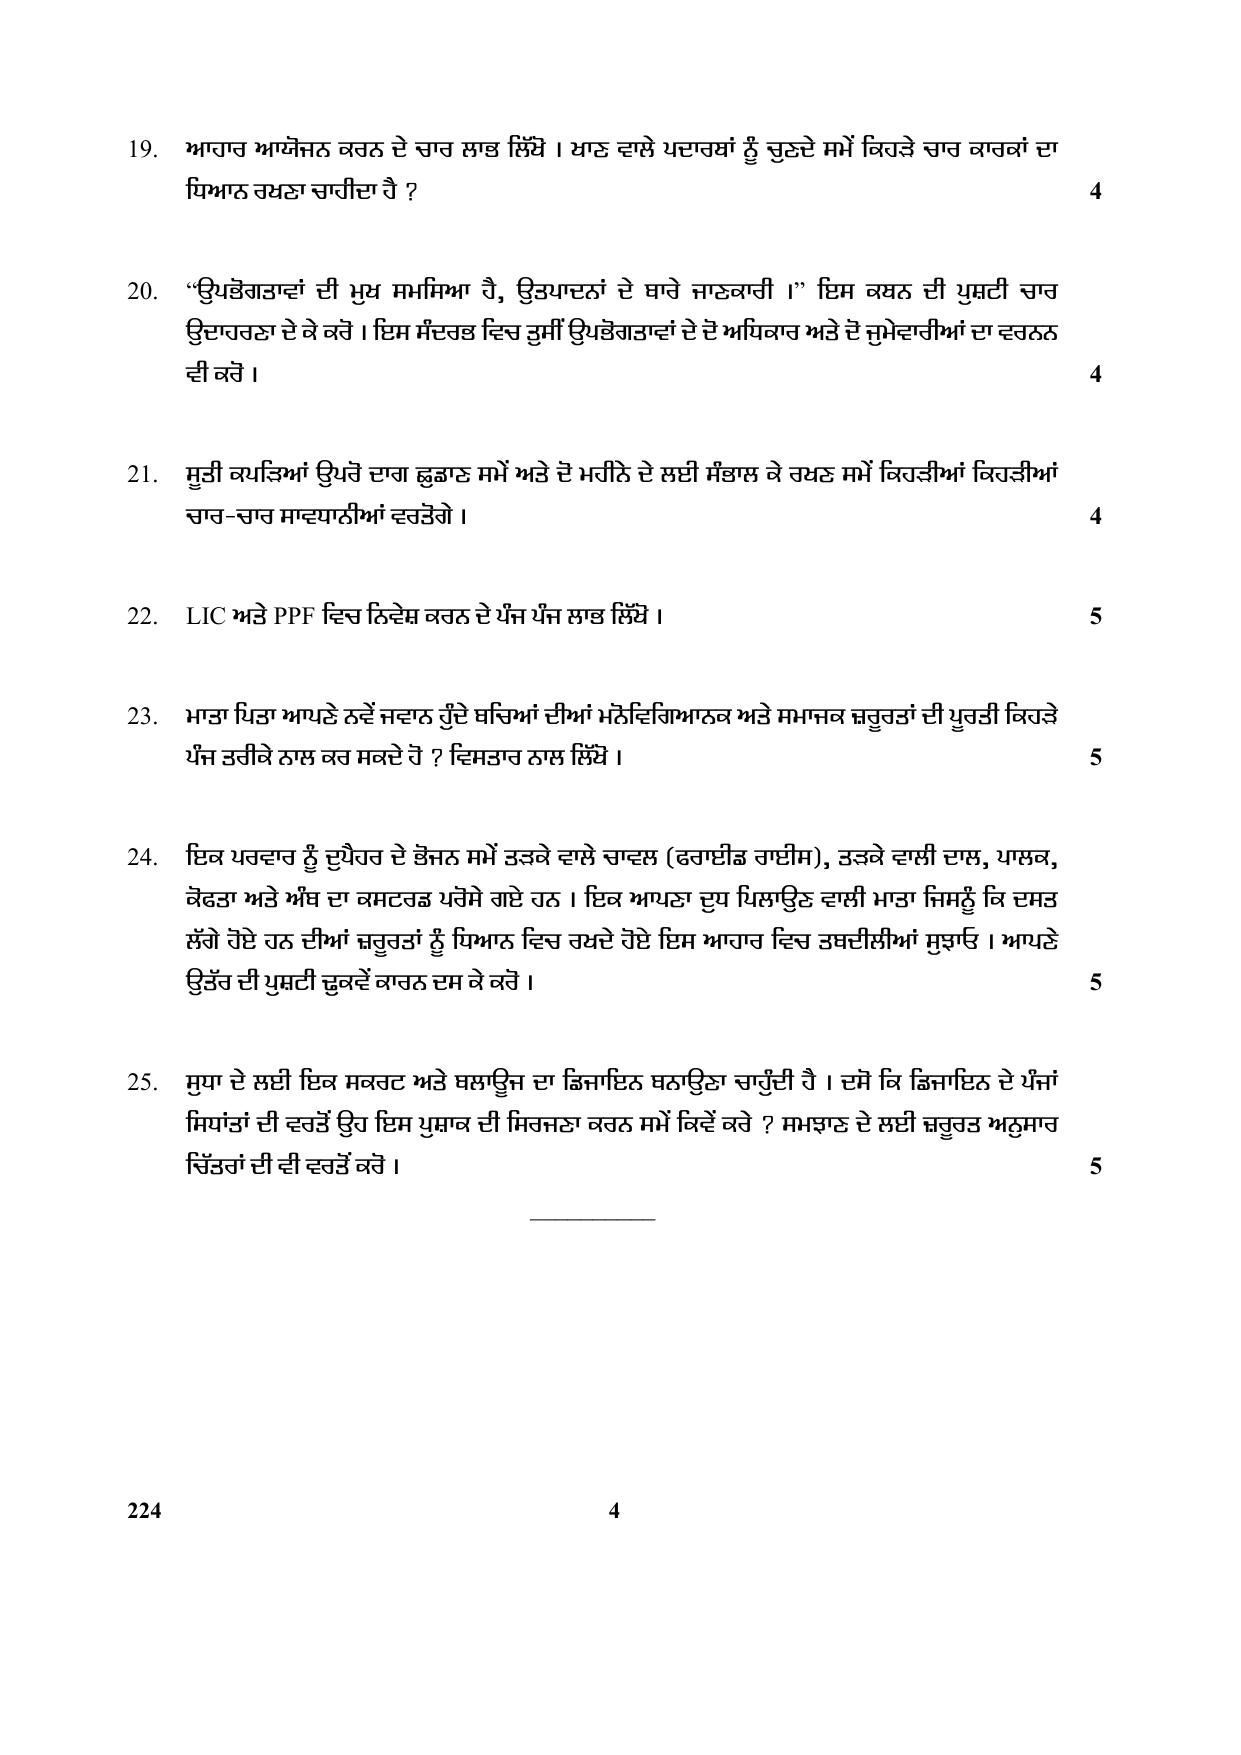 CBSE Class 12 224 (Home Science) Punjabi 2017-comptt Question Paper - Page 4